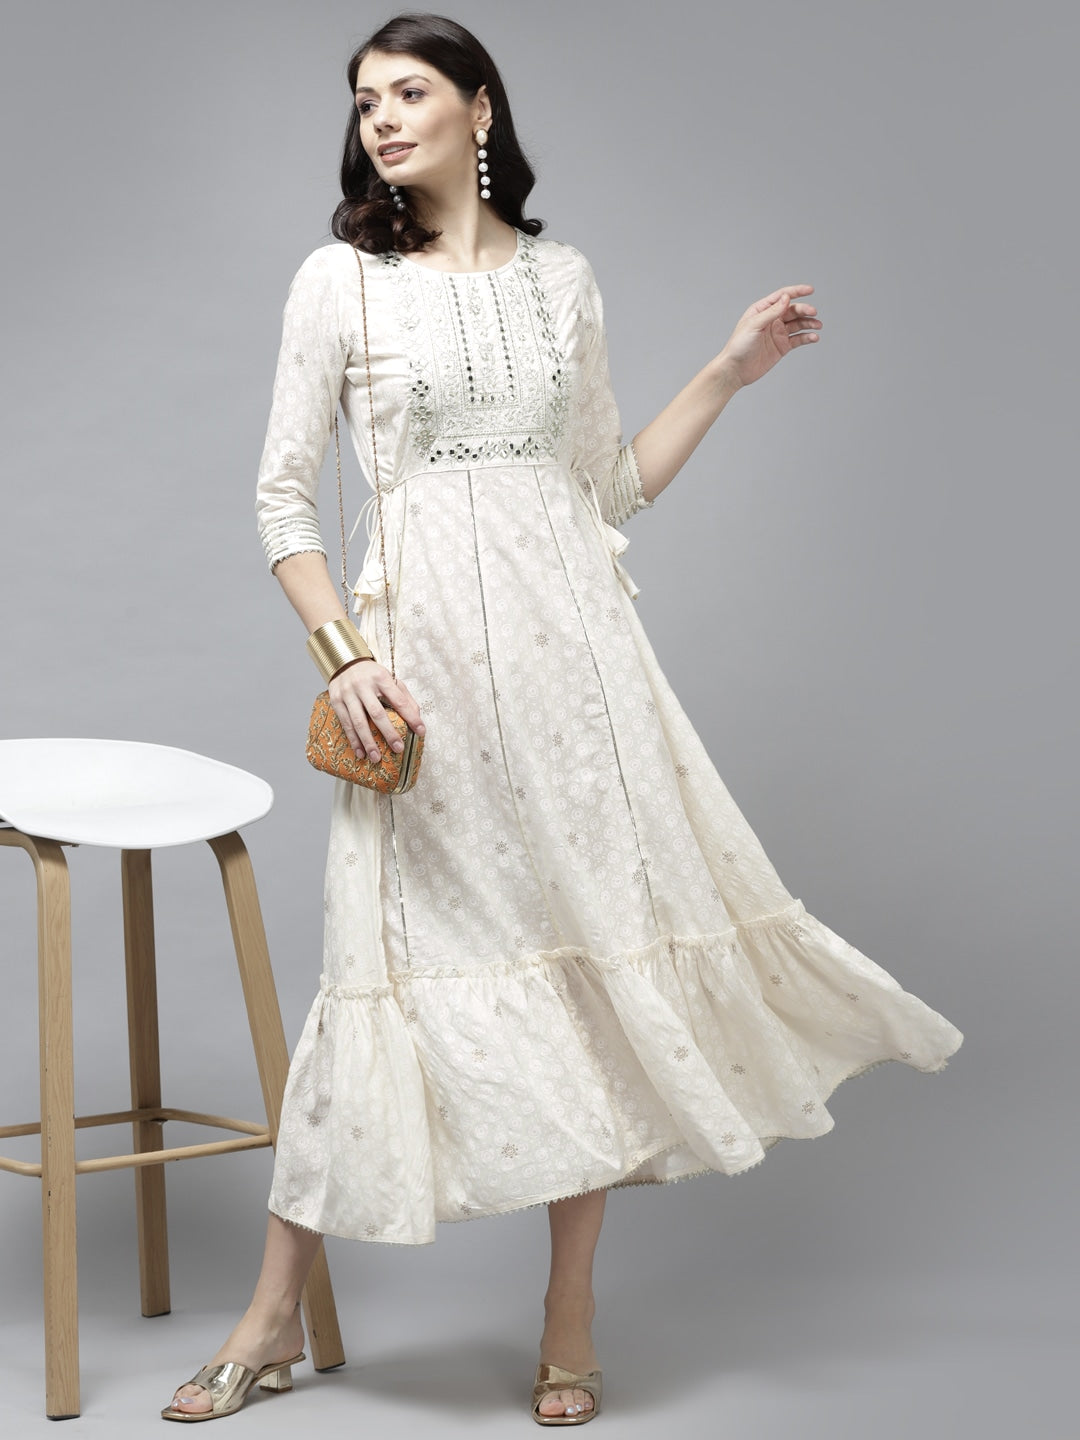 White Embroidered Dress-Yufta Store-5807DRSWHS